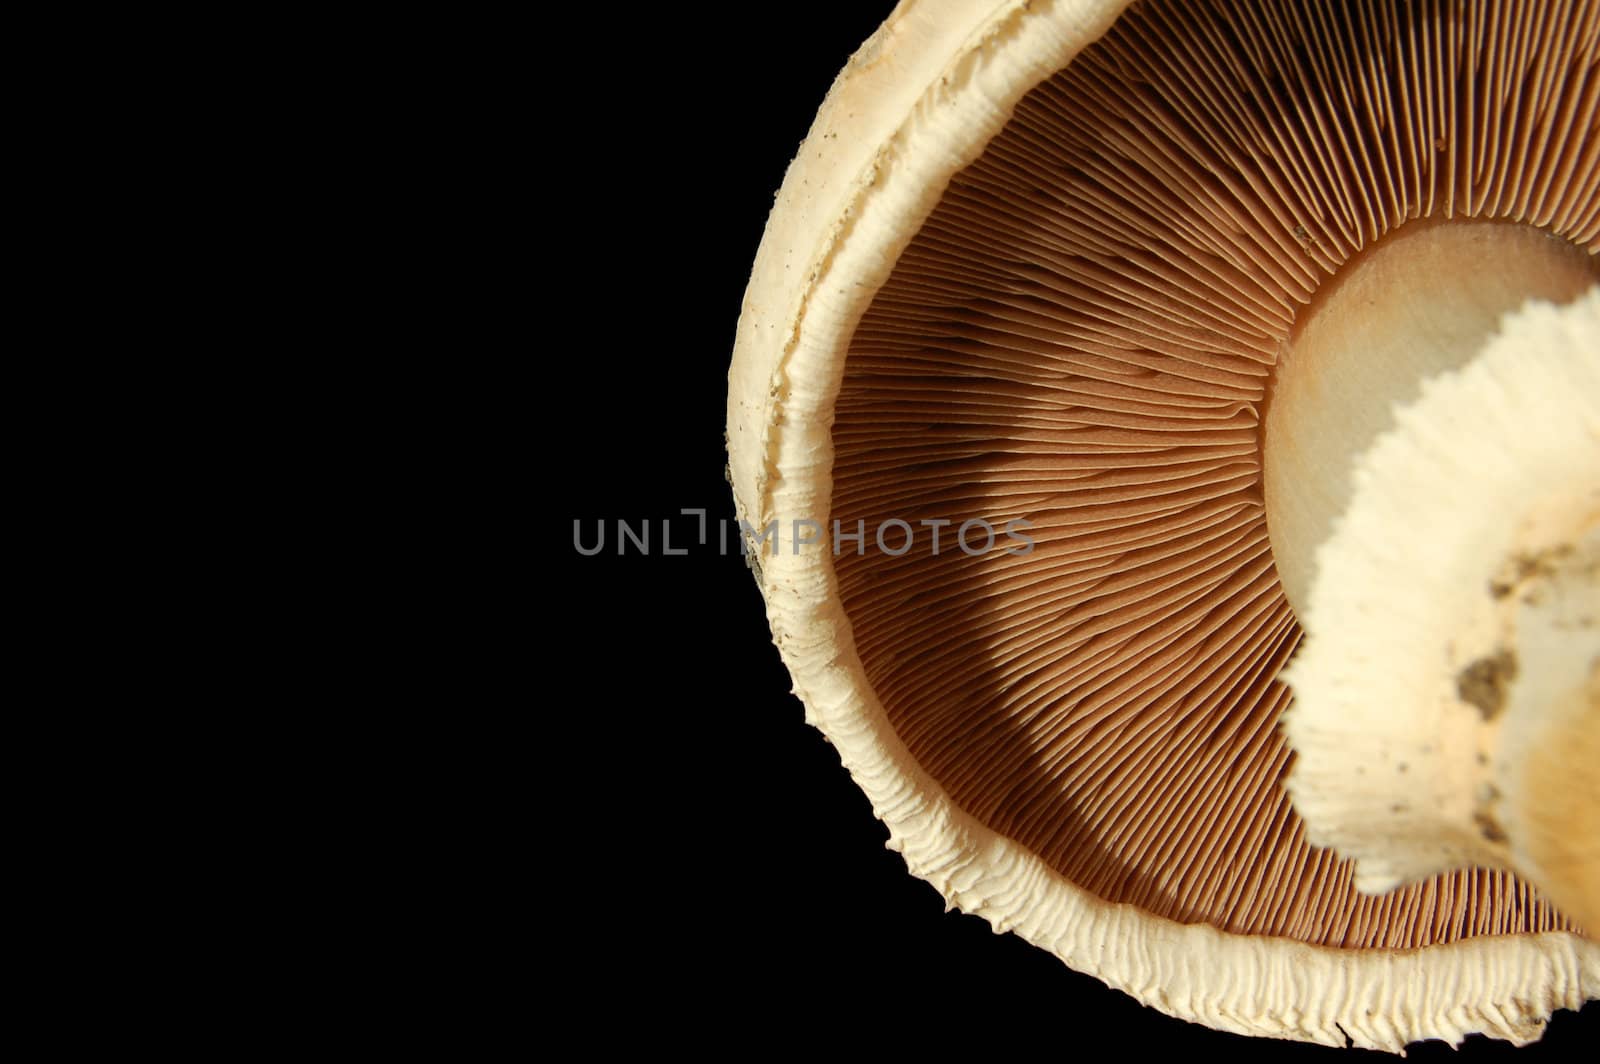 Closeup of the underside of a mushroom cap, showing the gills